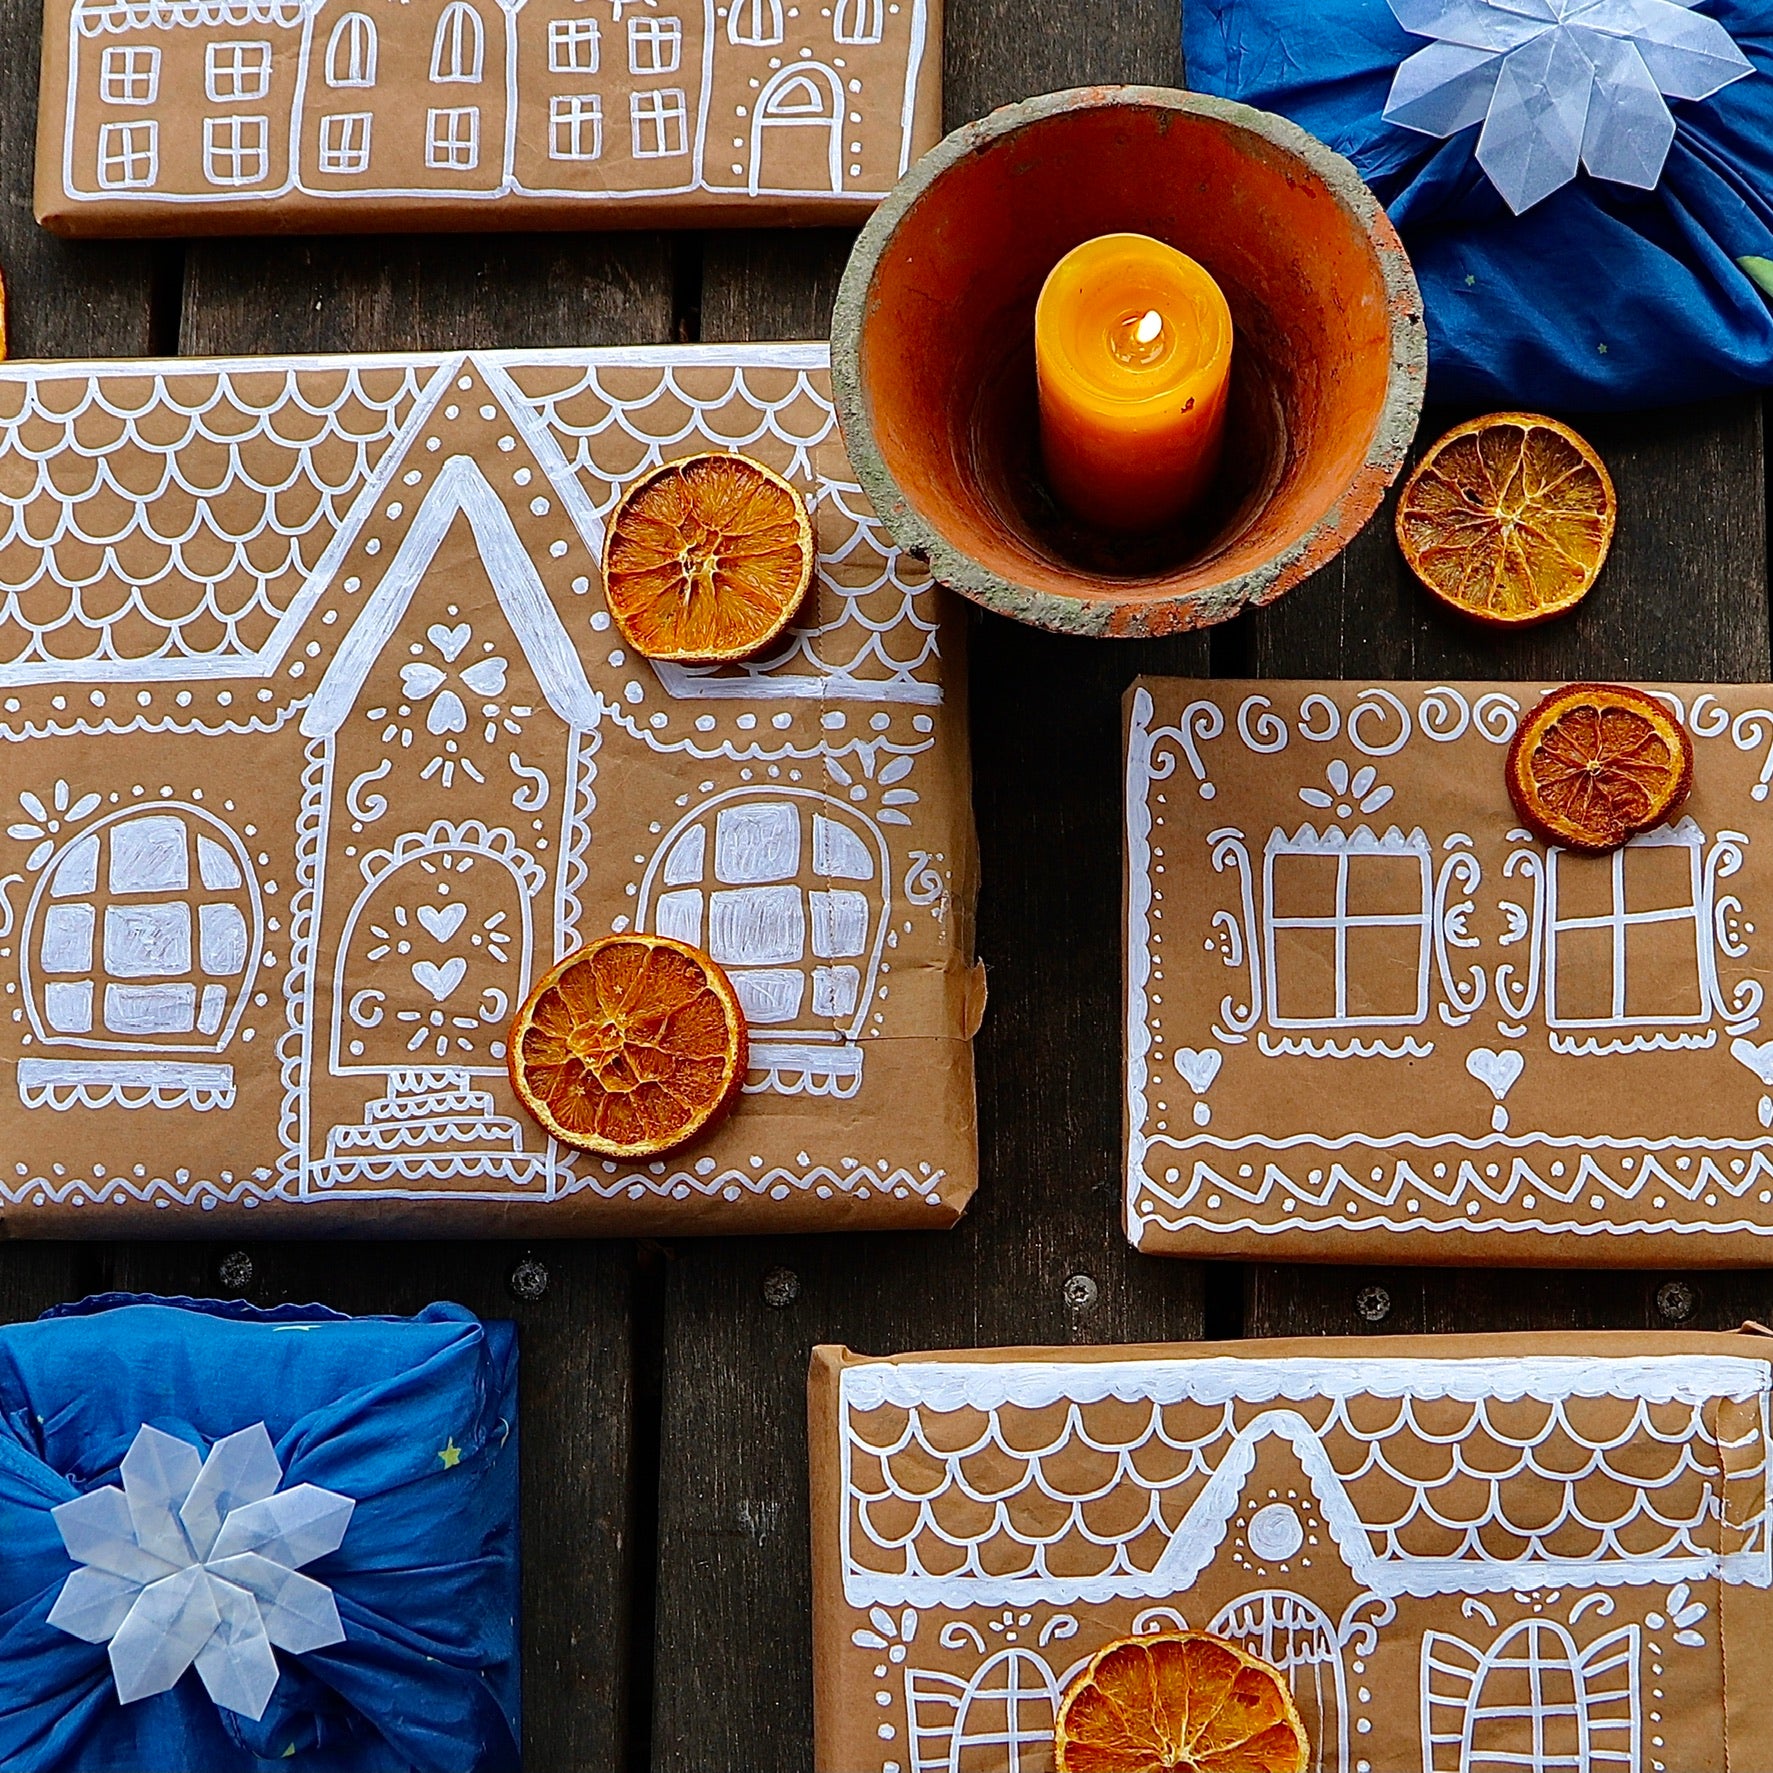 Make Your Gifts Sweet With This Gingerbread Wrapping DIY